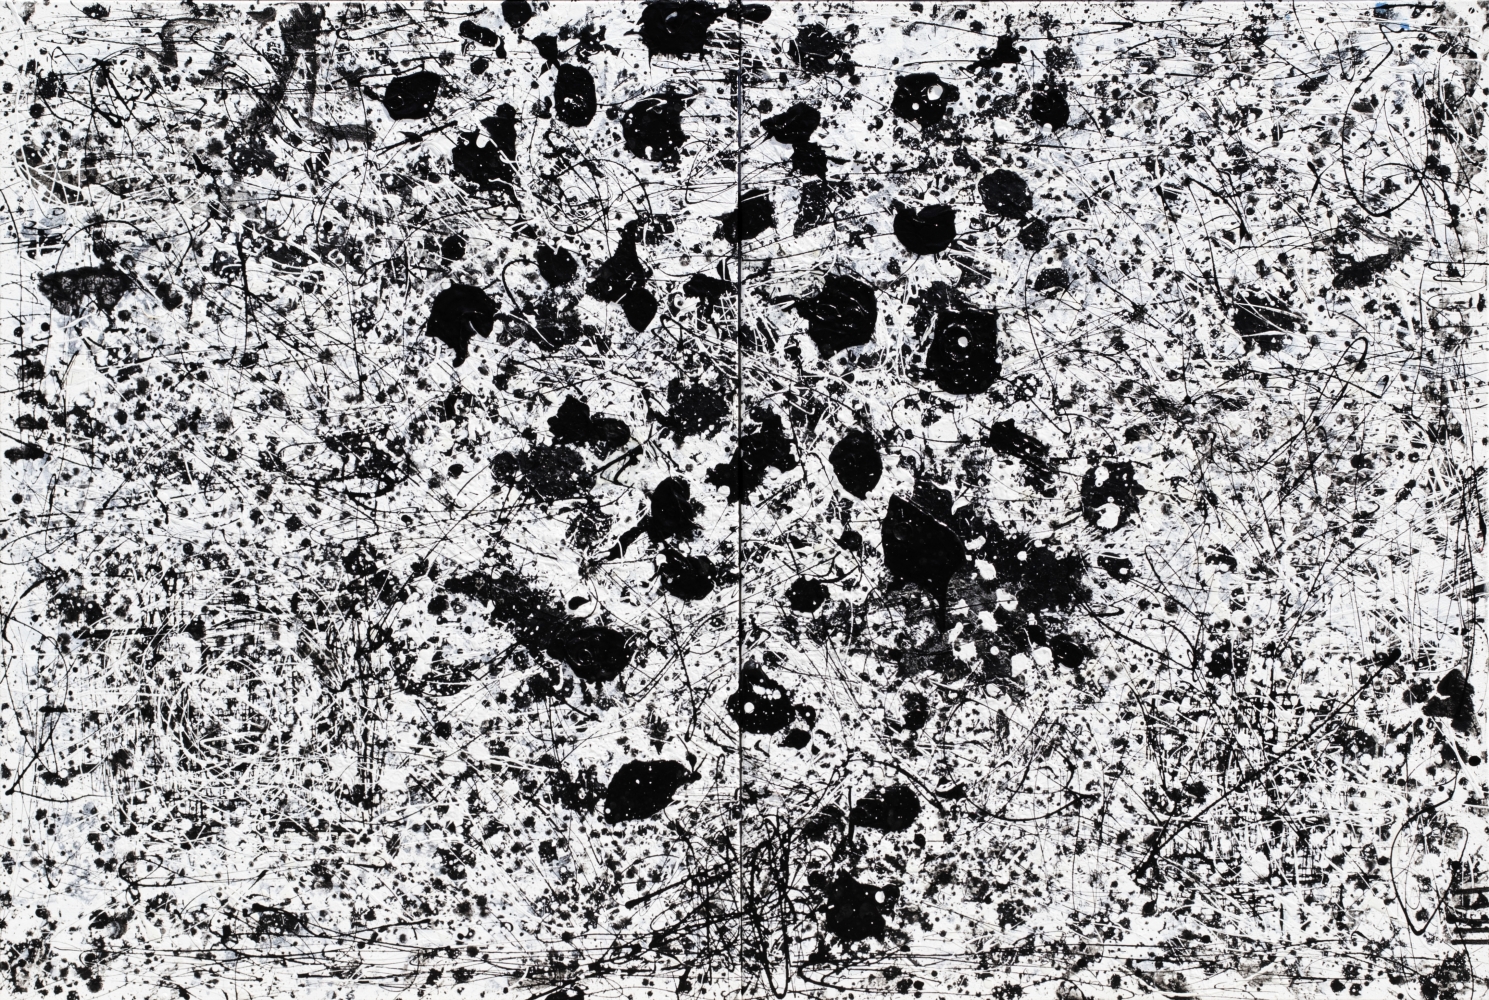 J. Steven Manolis, Black & White (My Long March Journey), 2020, 48 x 72 inches, Acrylic and latex enamel on canvas, Abstract Expressionism paintings for sale at Manolis Projects Art Gallery, Miami, Fl